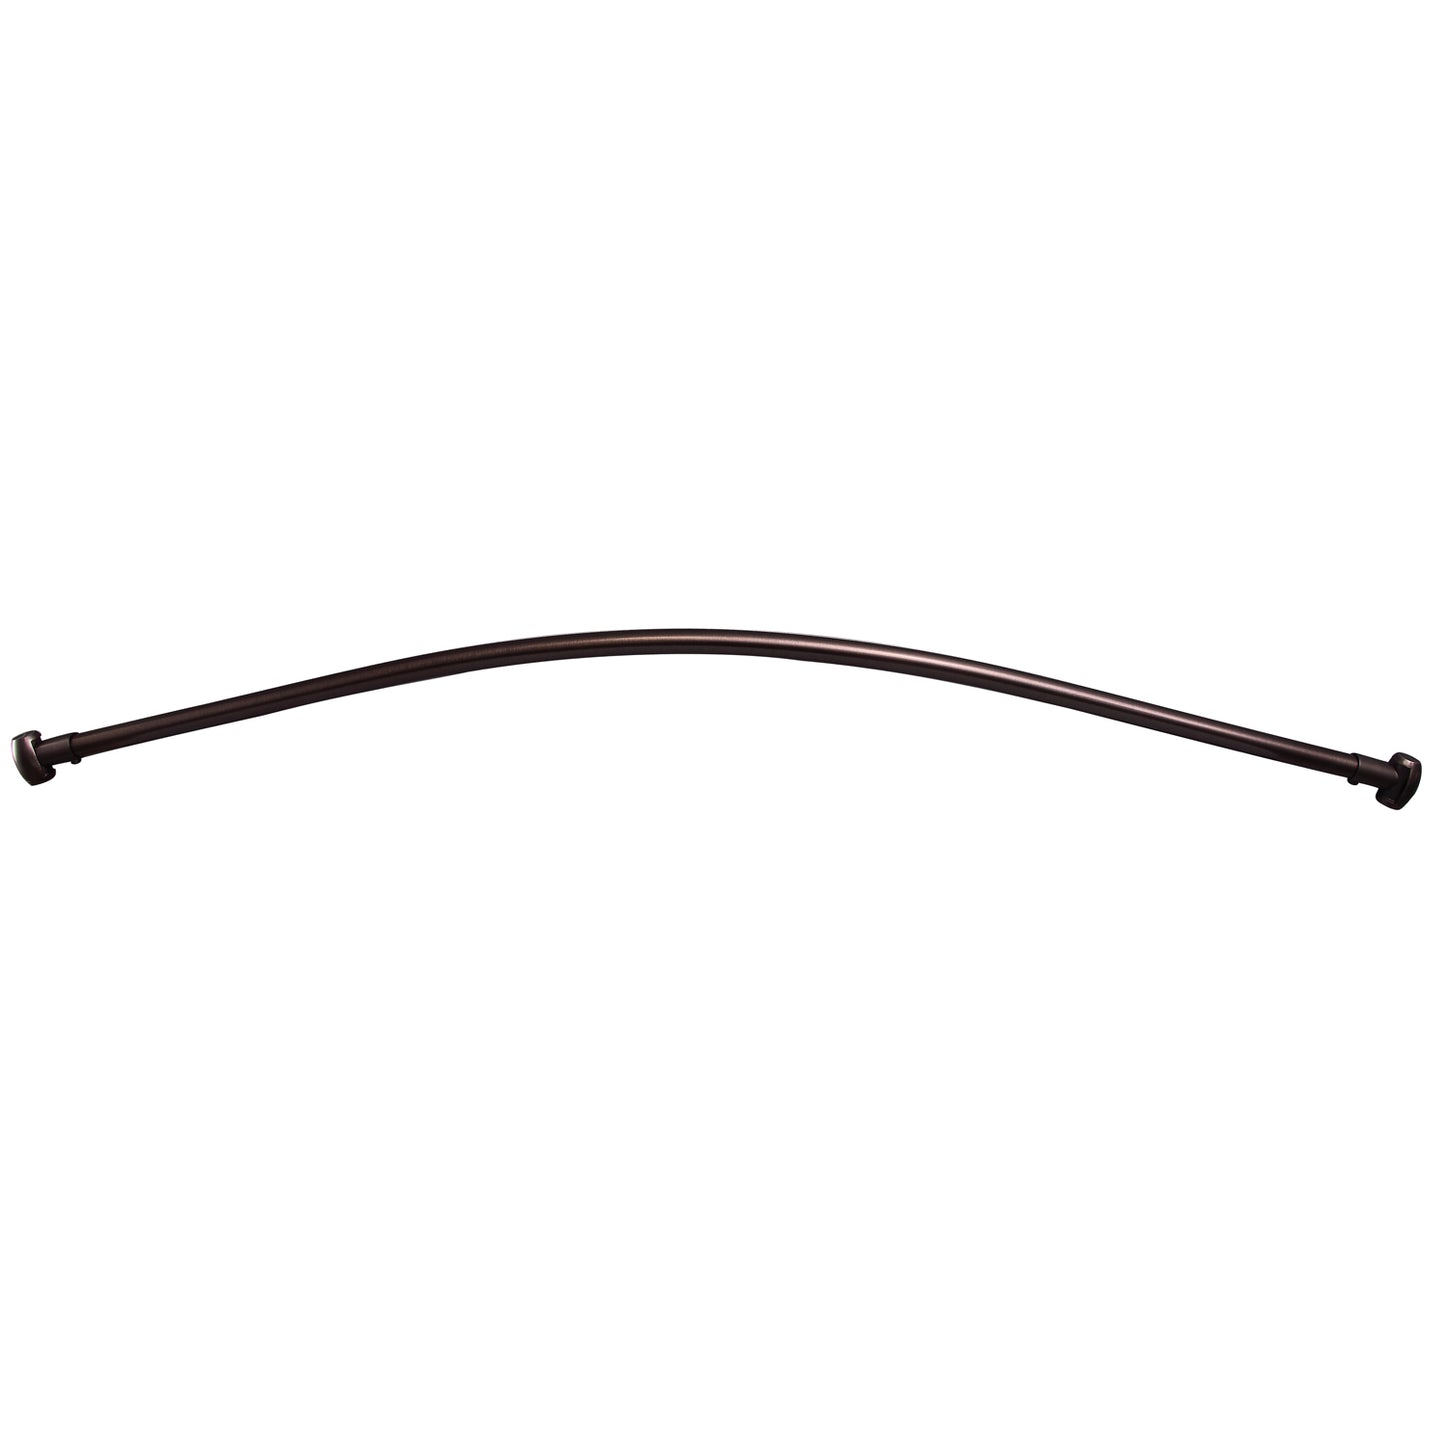 Curved 60" Shower Rod w/Flange in Oil Rubbed Bronze